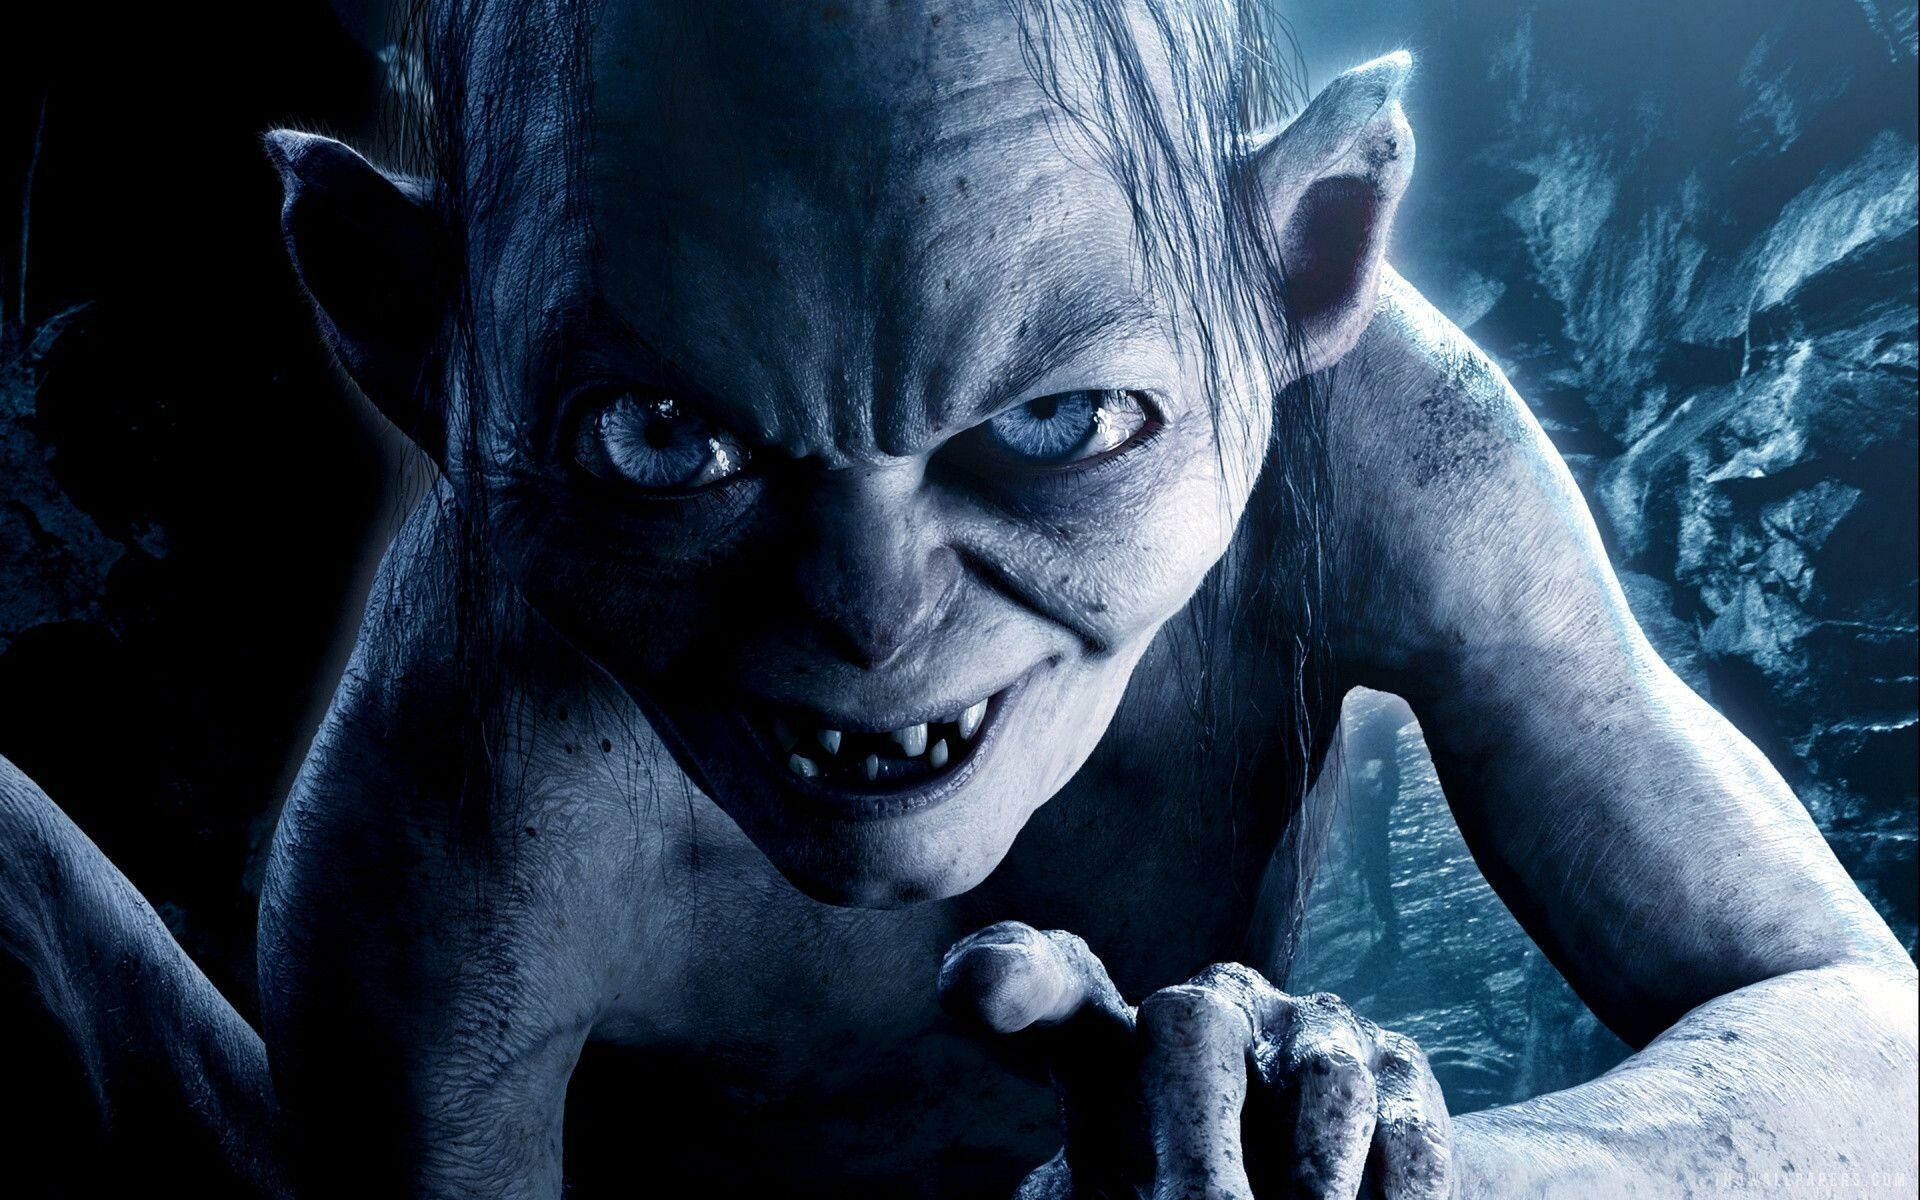 Gollum wallpapers, Lord of the Rings: Gollum game, Unique character design, 1920x1200 HD Desktop